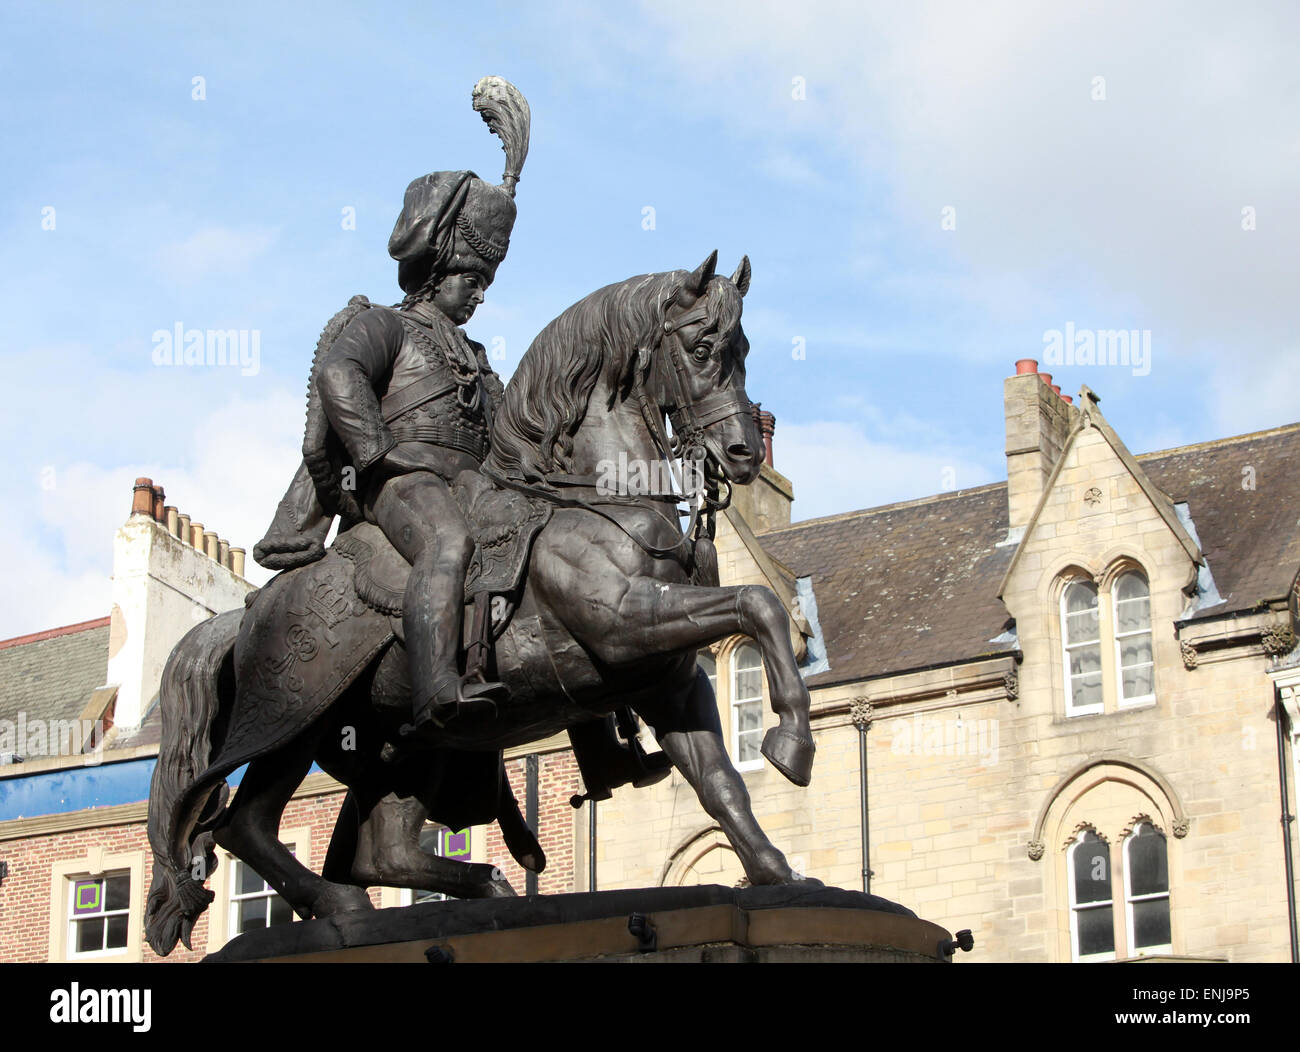 Statue of the Marquess of Londonderry, Clarles William Vane Tempest Stewart, in Durham Market Place, by artist Monti Raffaelle Stock Photo